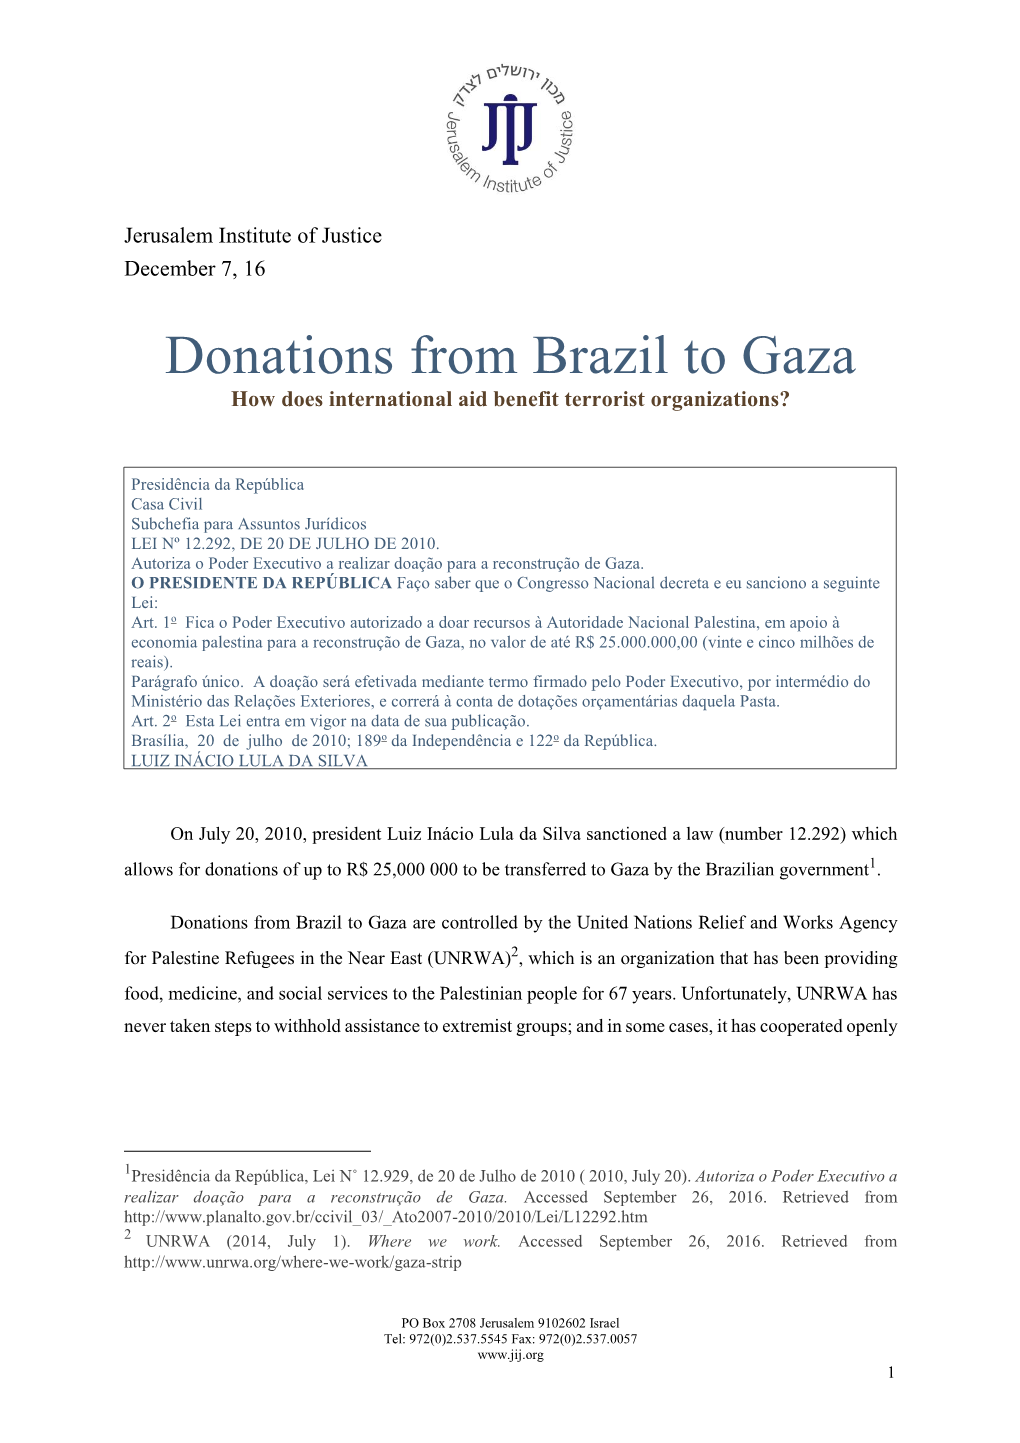 Donations from Brazil to Gaza How Does International Aid Benefit Terrorist Organizations?